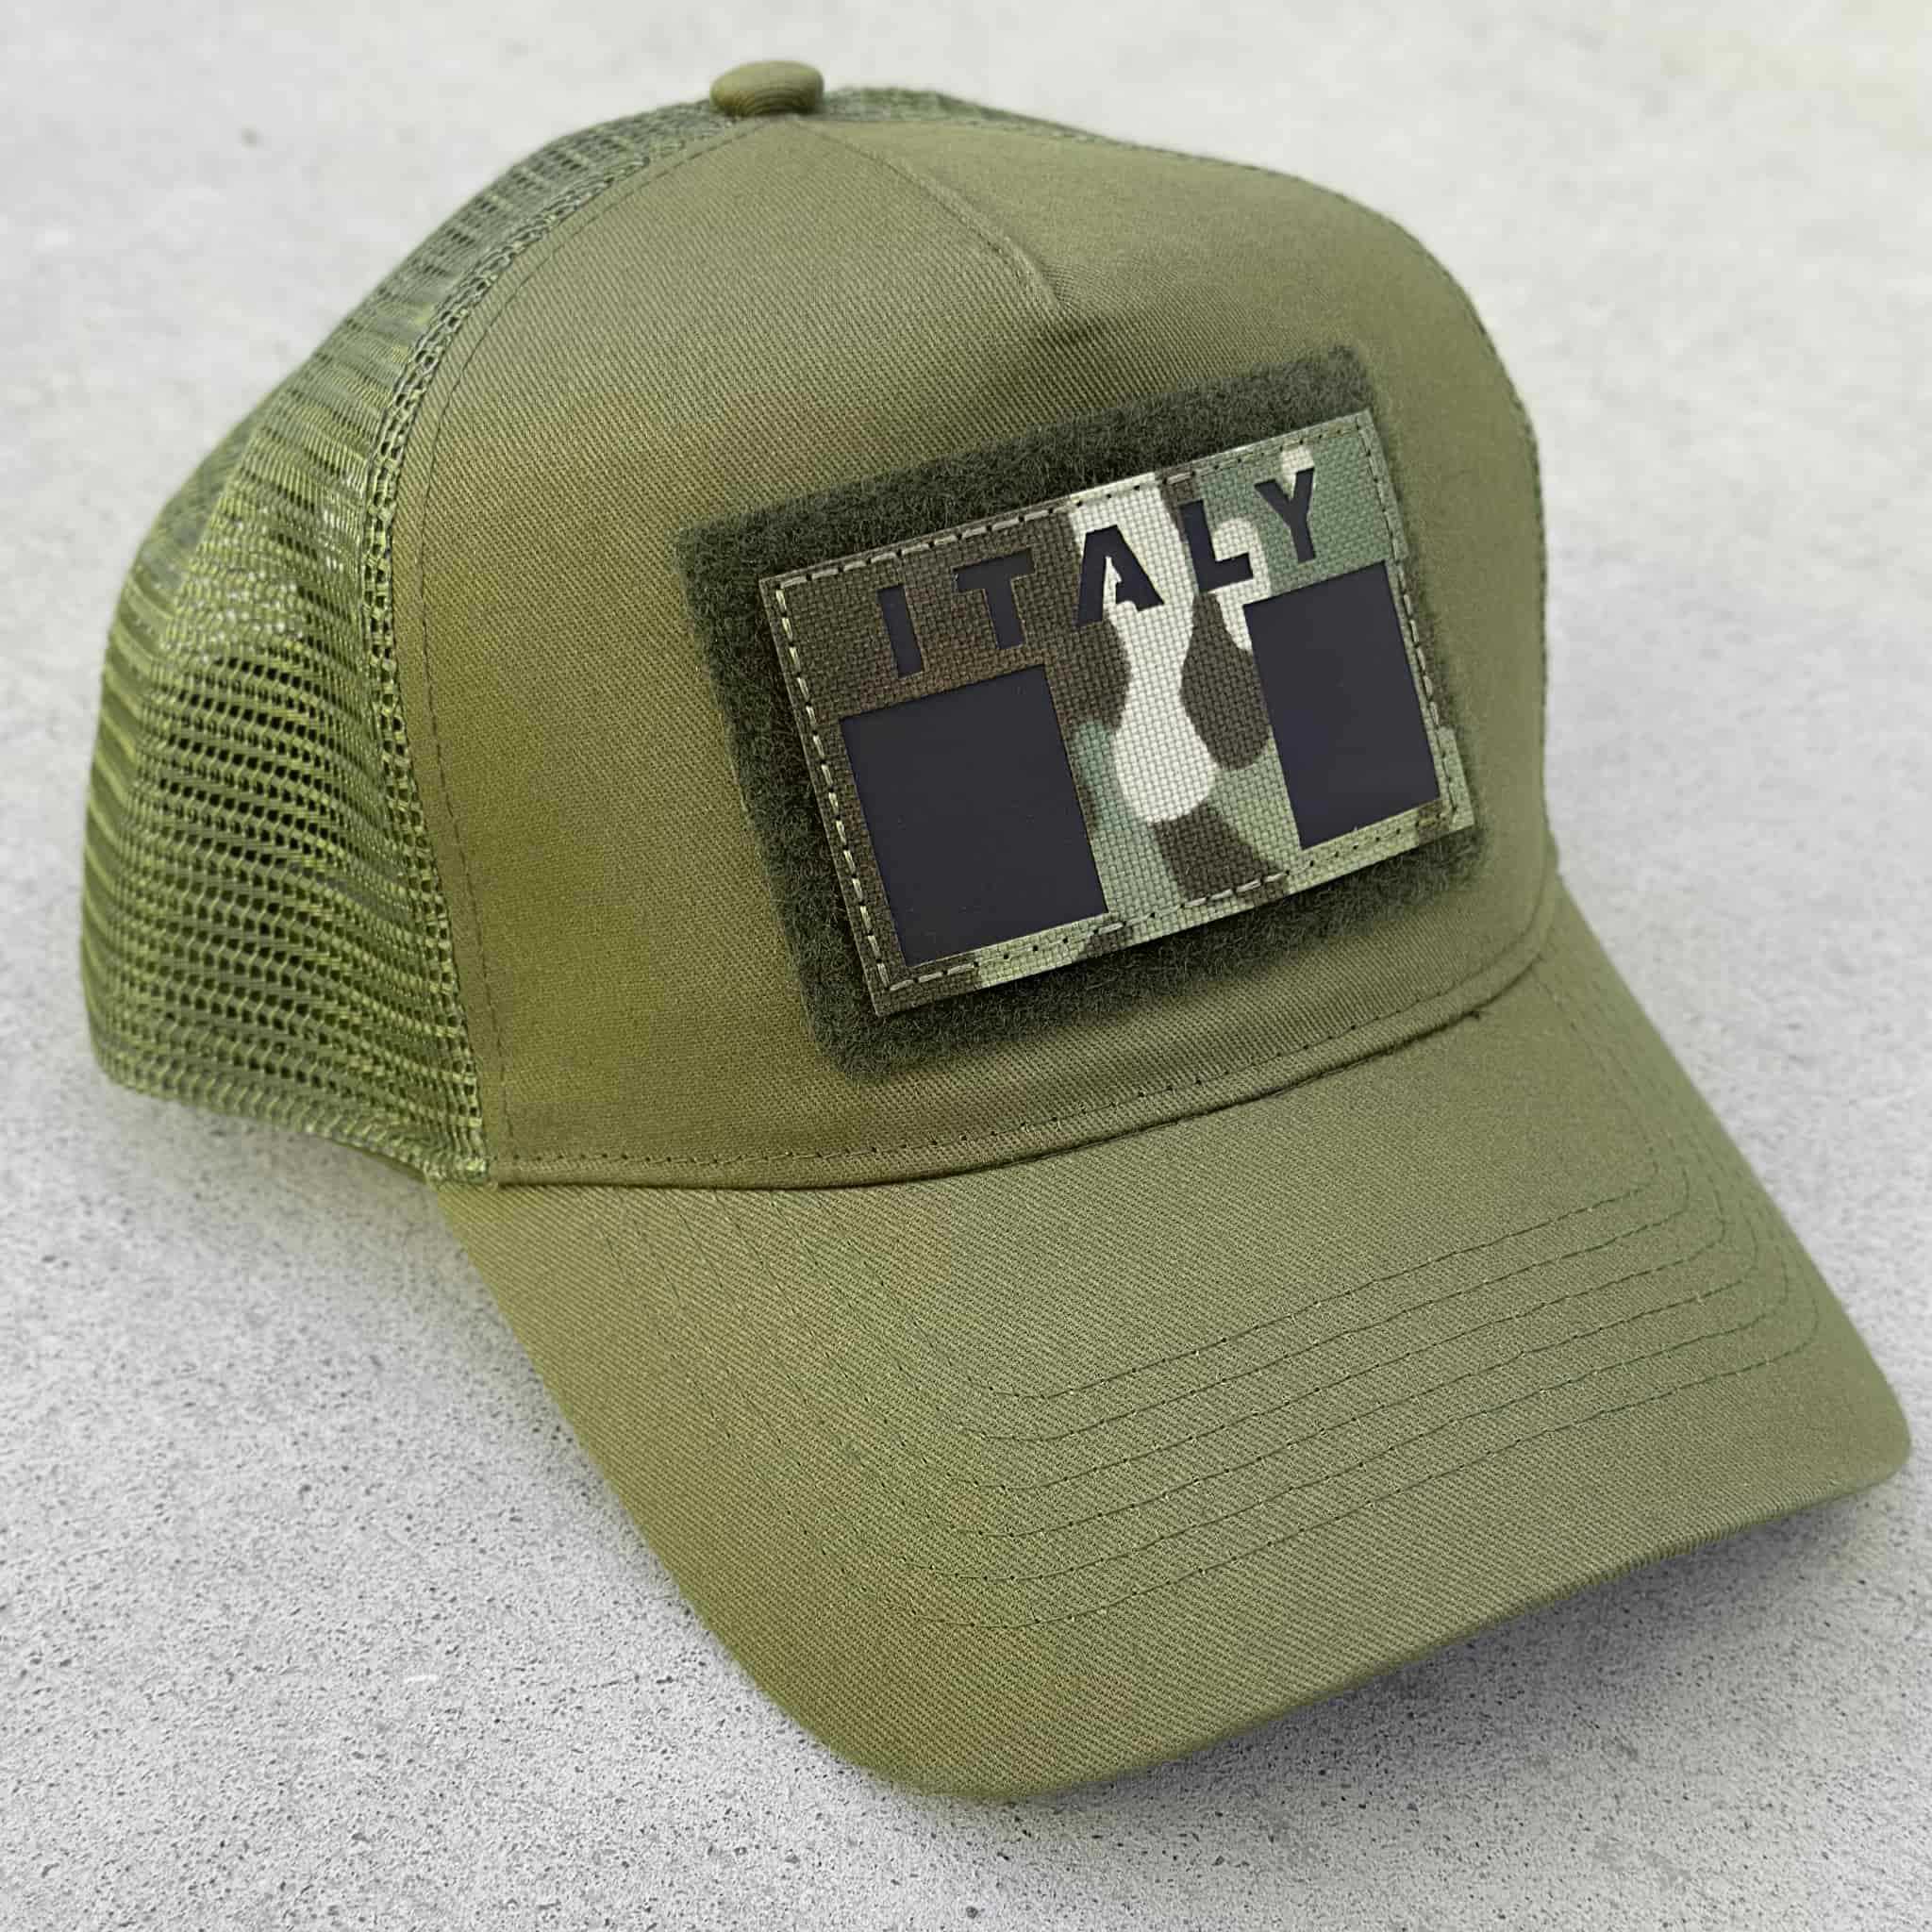 The Italy Snapback Cap Bundle in military green color with patch attached